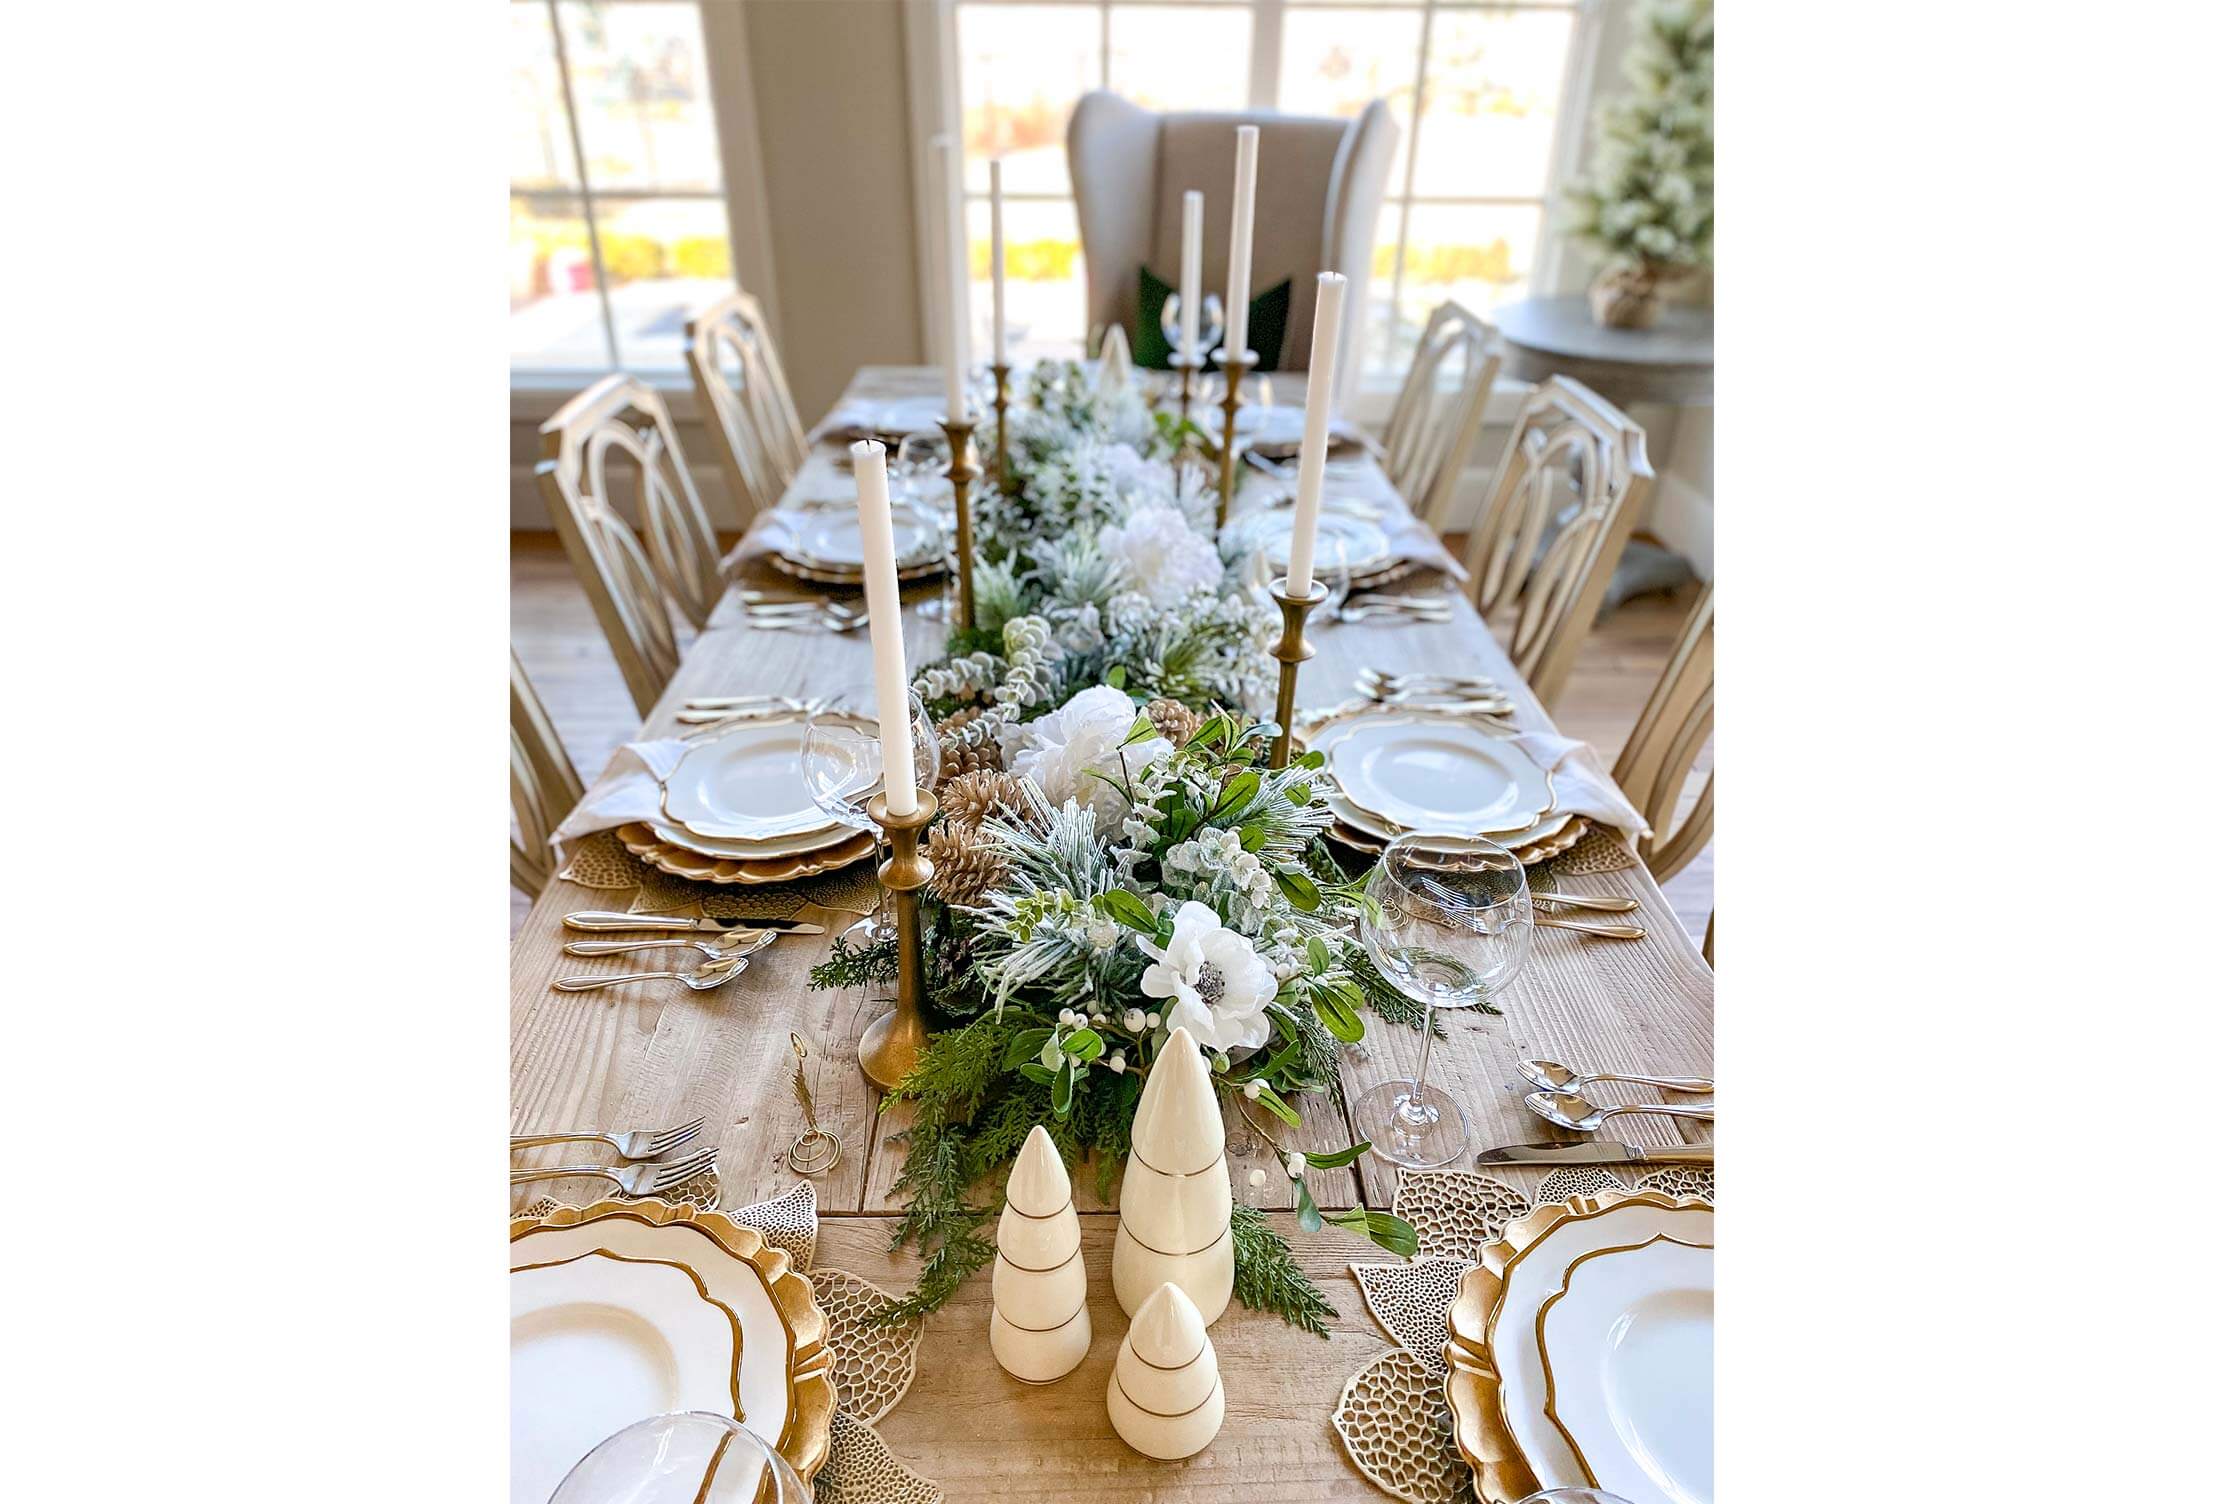 Versatility of this Tablescape